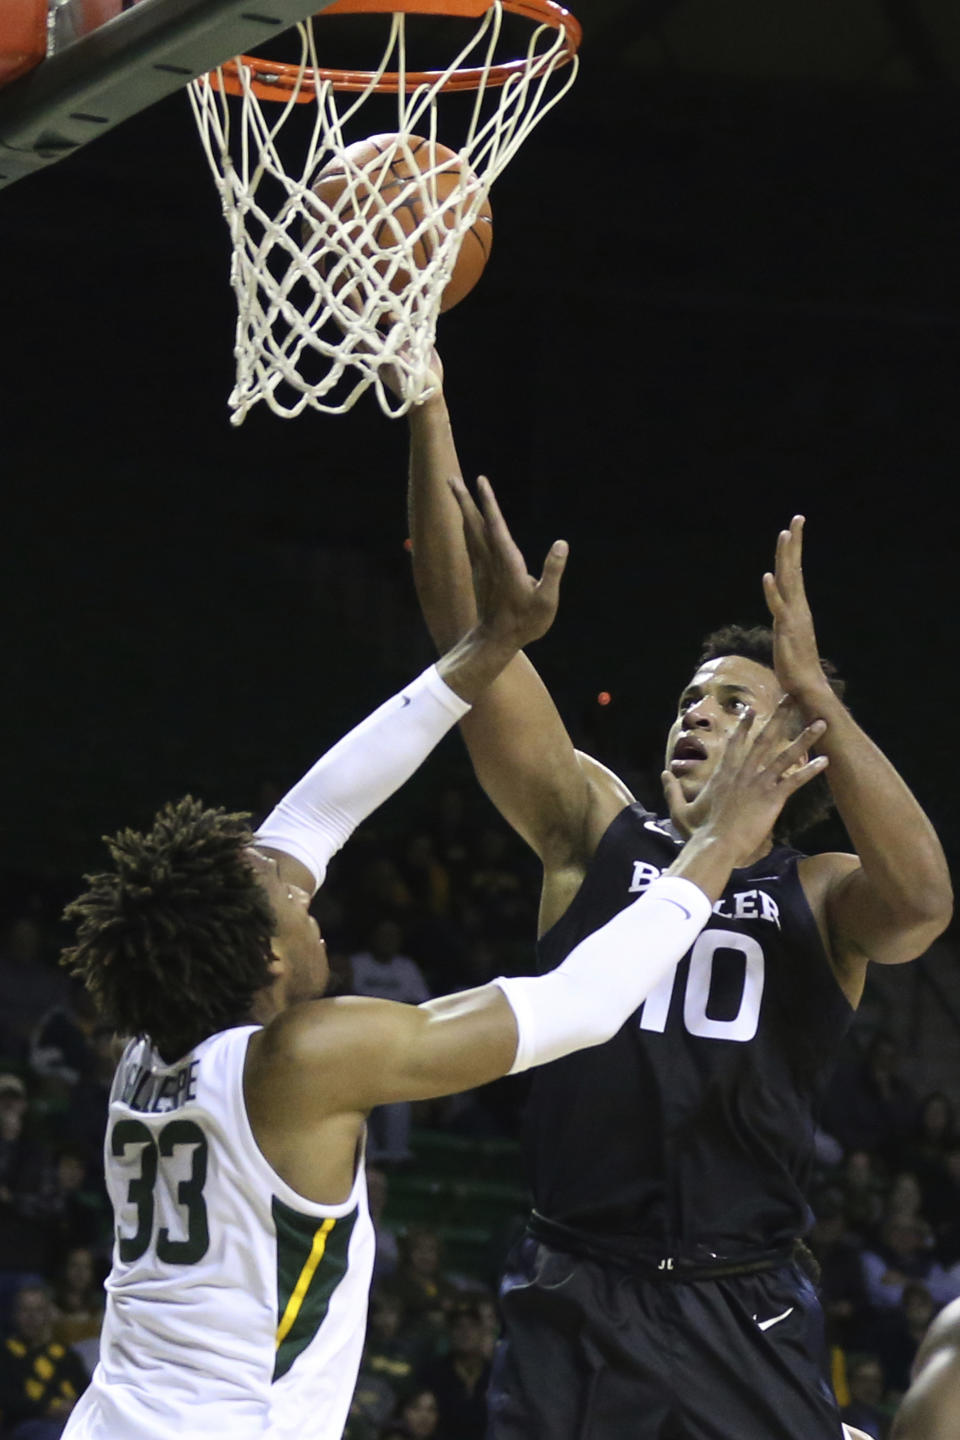 Butler forward Bryce Nze, right, shoots over Baylor forward Freddie Gillespie in the first half of an NCAA college basketball game, Tuesday, Dec. 10, 2019, in Waco, Texas. (AP Photo/Rod Aydelotte)